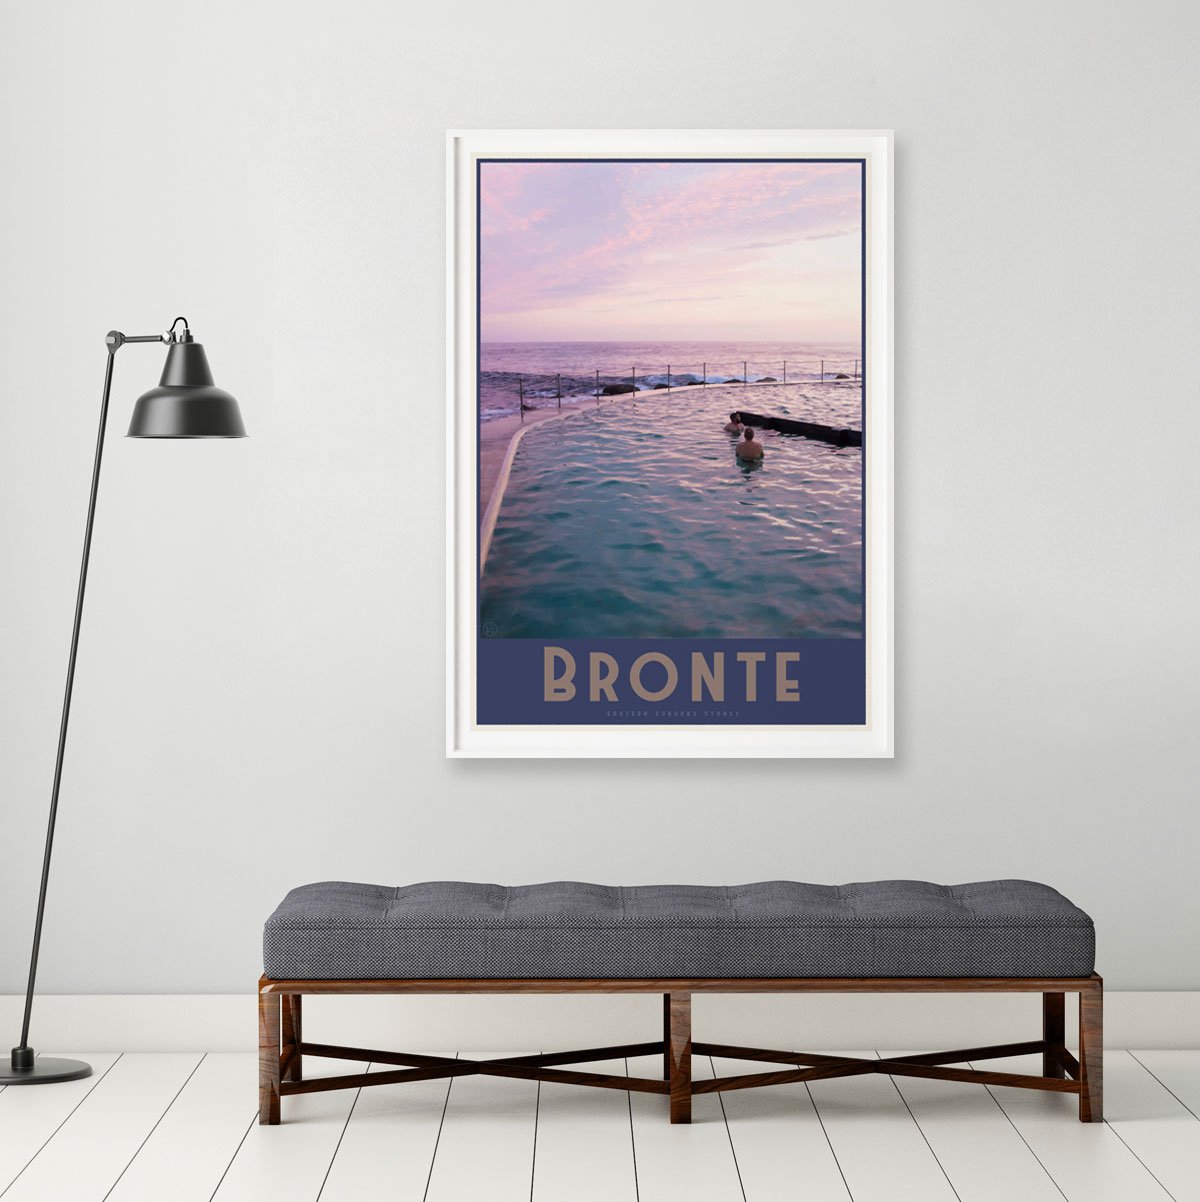 Bronte vintage travel style framed prints by places we luv